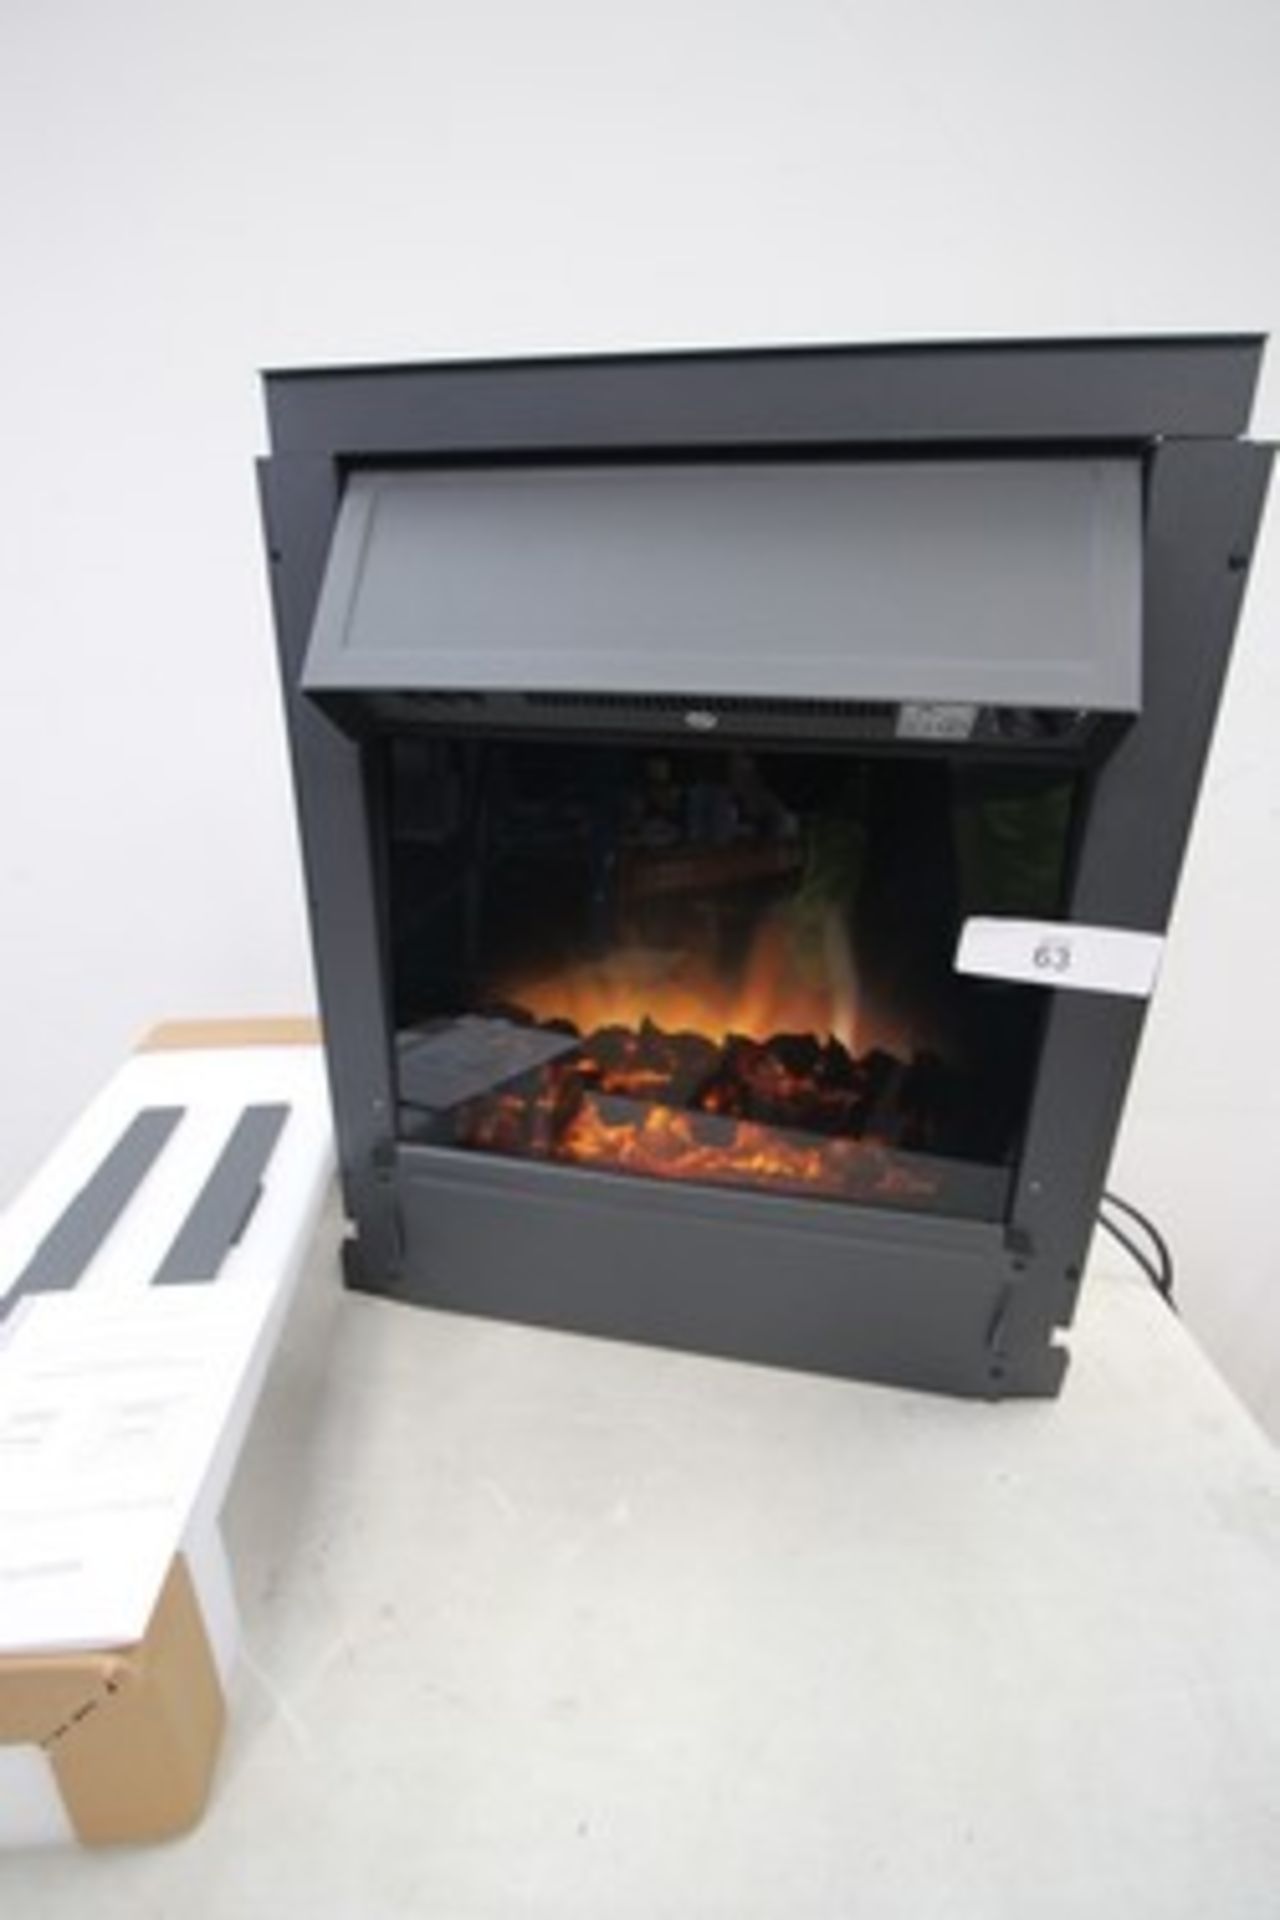 1 x Fired Up Corporation inset electric fireplace, dimensions 700 x 600 x 25mm, model No: 23W43 - n